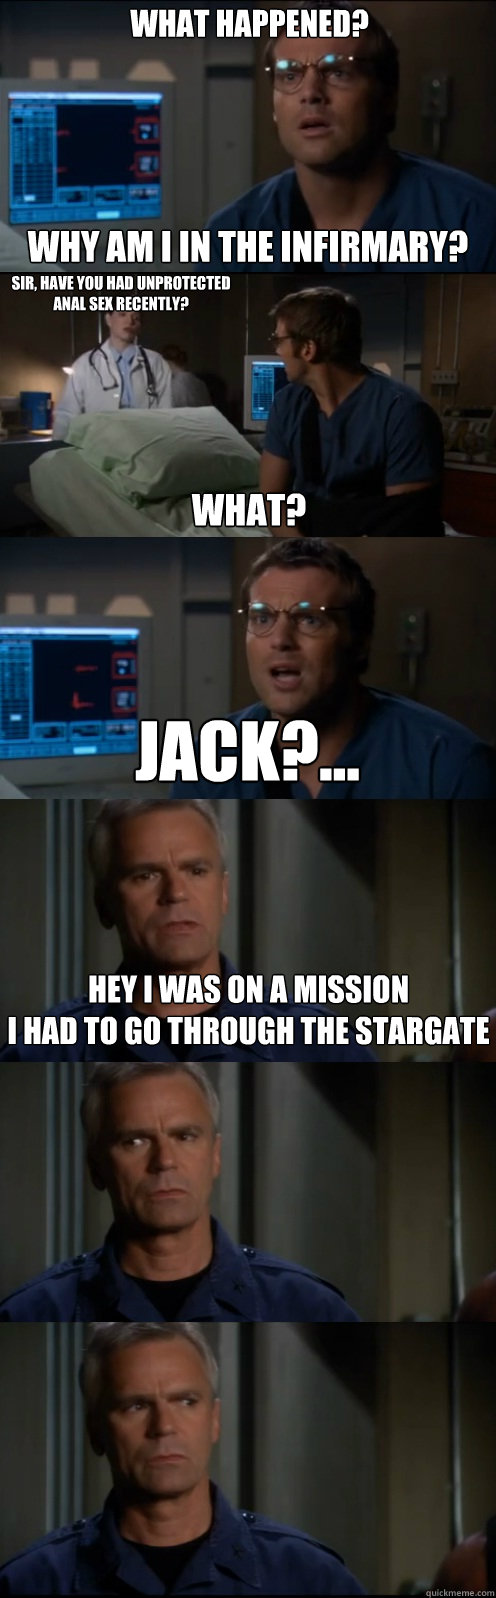 What Happened?  Why am I in the infirmary? Sir, have you had unprotected anal sex recently? What? Jack?... Hey I was on a mission
I had to go through the stargate - What Happened?  Why am I in the infirmary? Sir, have you had unprotected anal sex recently? What? Jack?... Hey I was on a mission
I had to go through the stargate  Through the Stargate